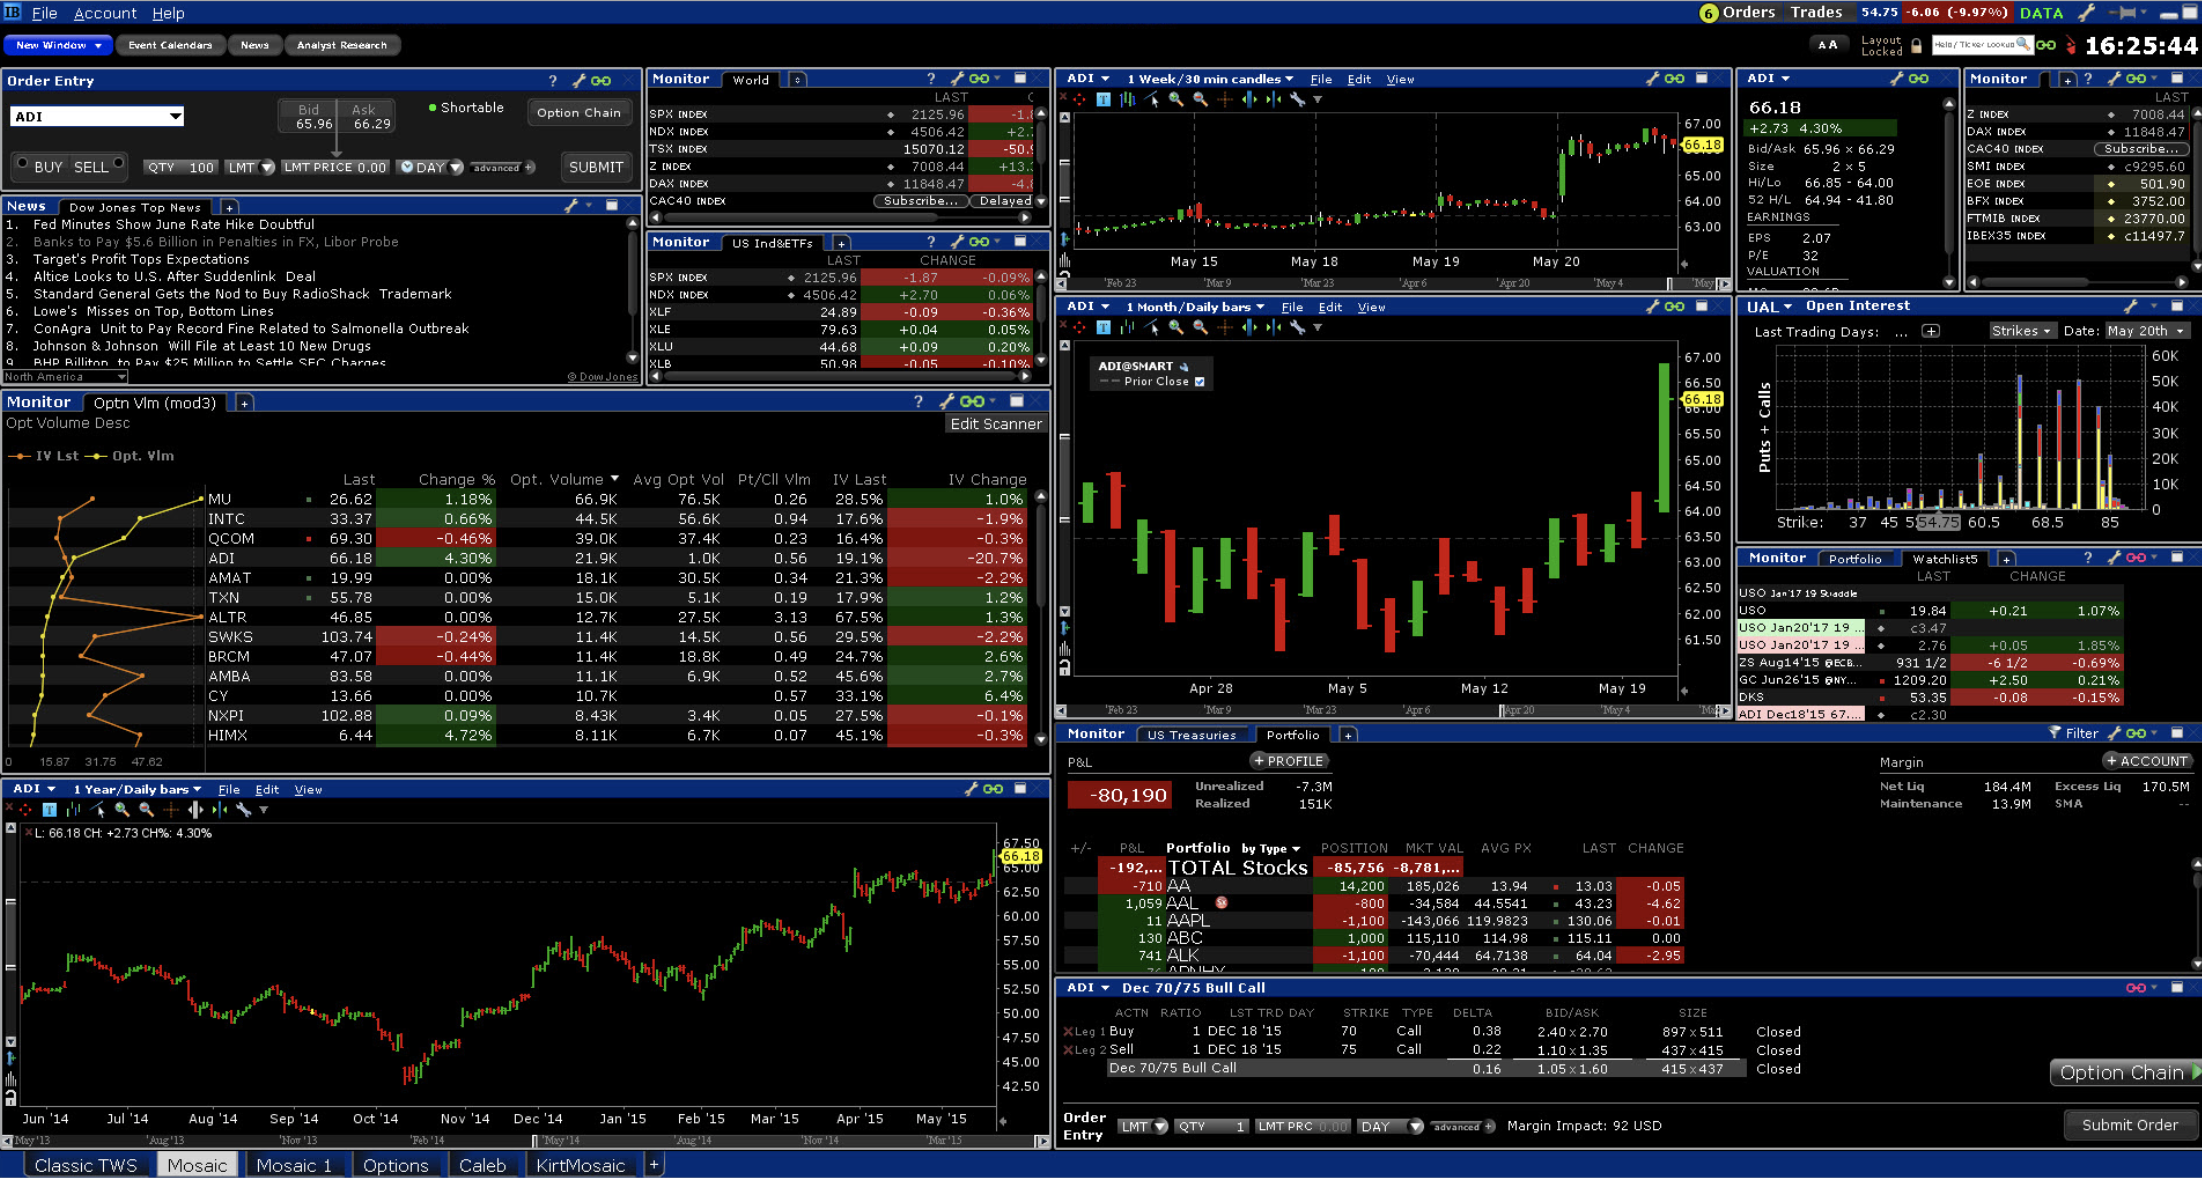 The Interactive Brokers Trader Workstation